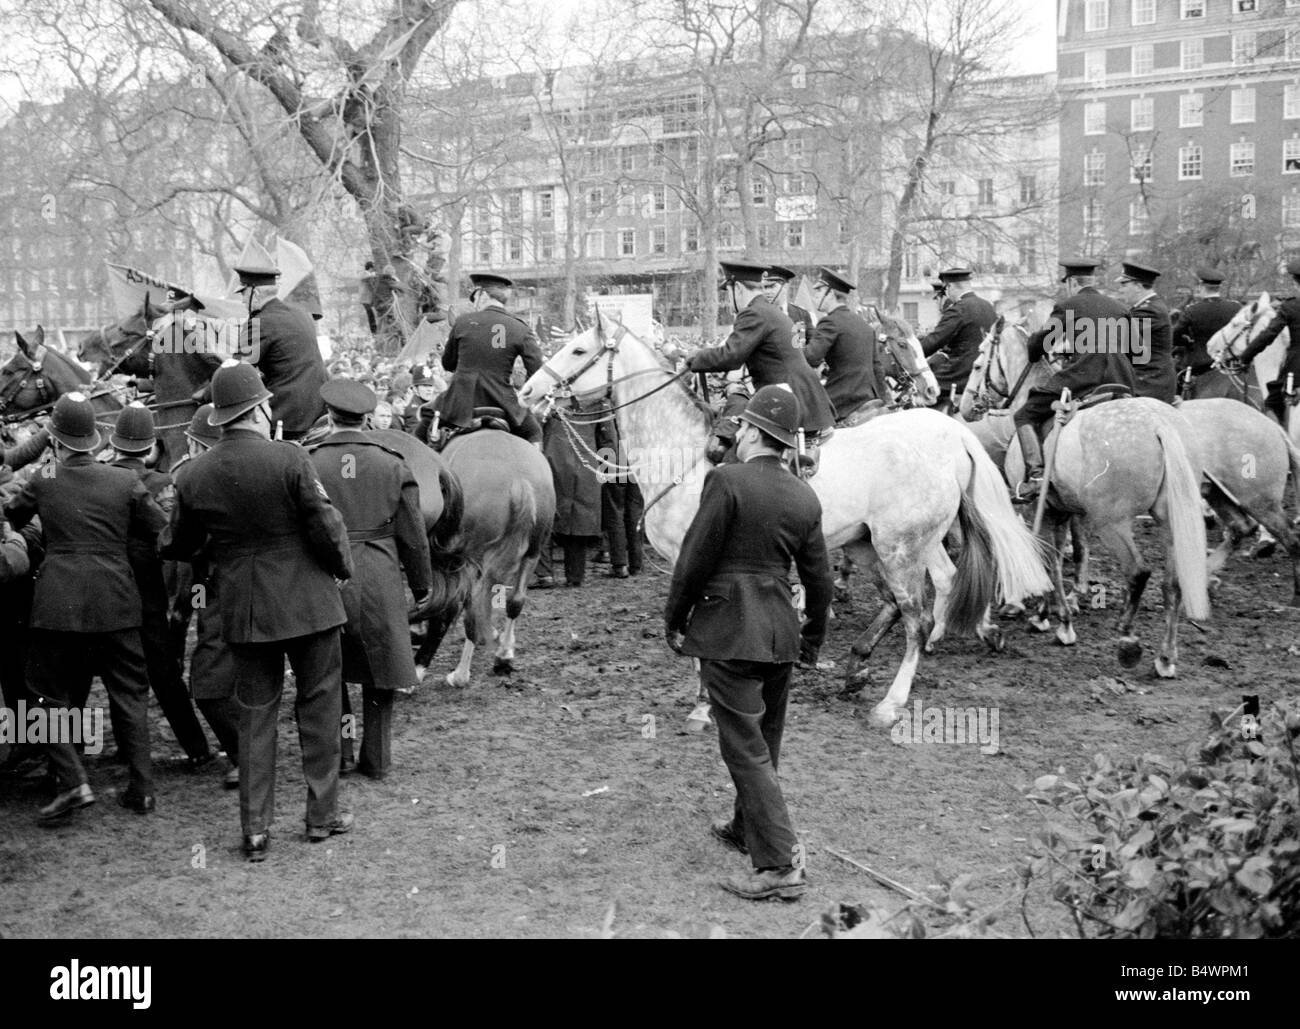 Police on horseback try to retore order during a demonstration in Grosvenor Square against US involvement in the Vietnam War. The protests led to violence with 91 police injured and over 200 demonstrators arrested.;March 1968;DM Y2615-21c Stock Photo